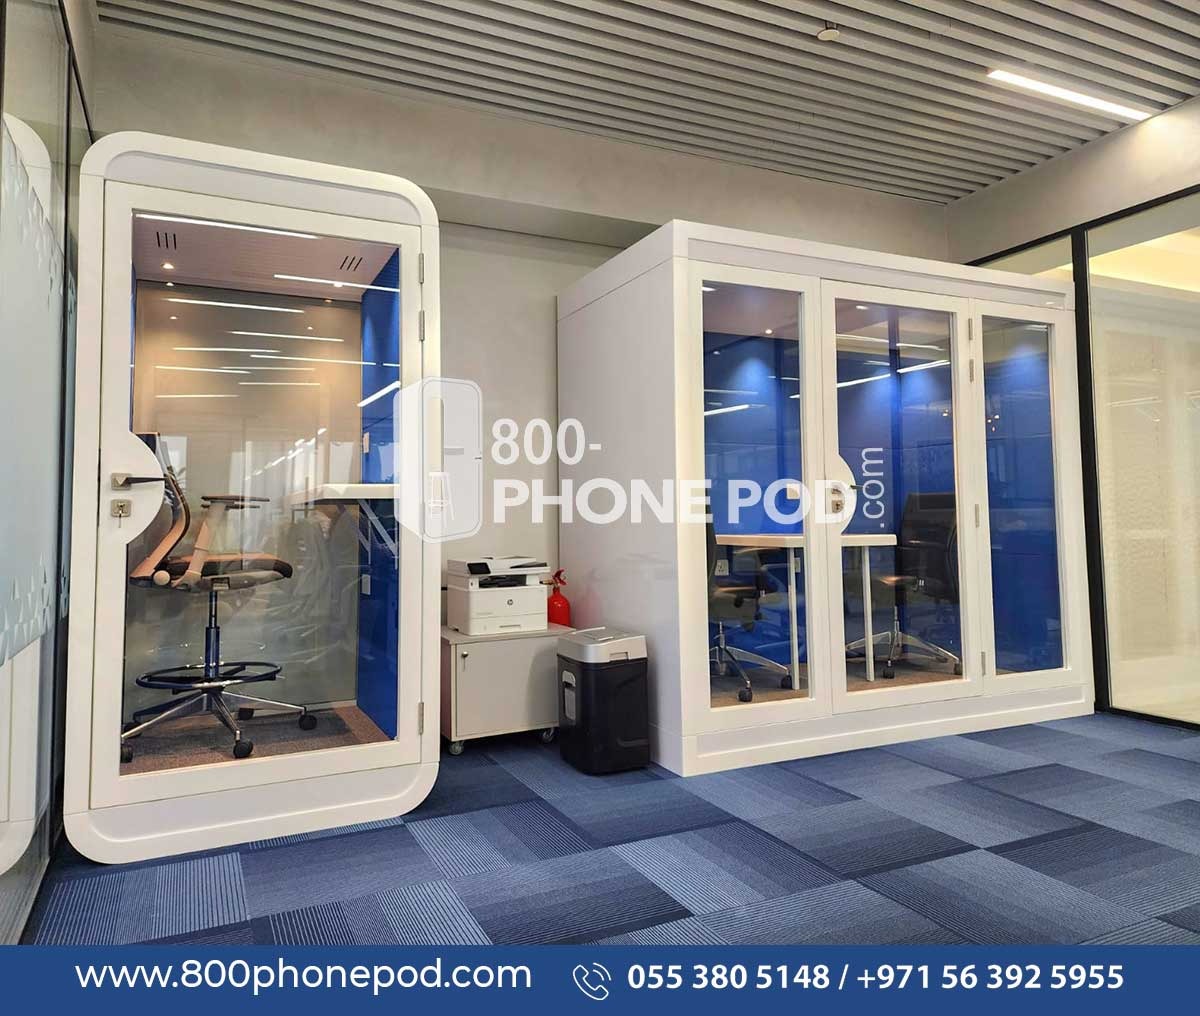 🌟Our Recent #Project🌟
'Most Popular #White Coloured Pods with Cobalt Blue #Acousticfabric' - #SinglePods & #DuoPods @DIFC - Dubai💼
Looking to transform your #workspace?
Contact us today at📞055 380 5148 & step into the future of workspace #privacy .
#acousticpod #dubai #UAE